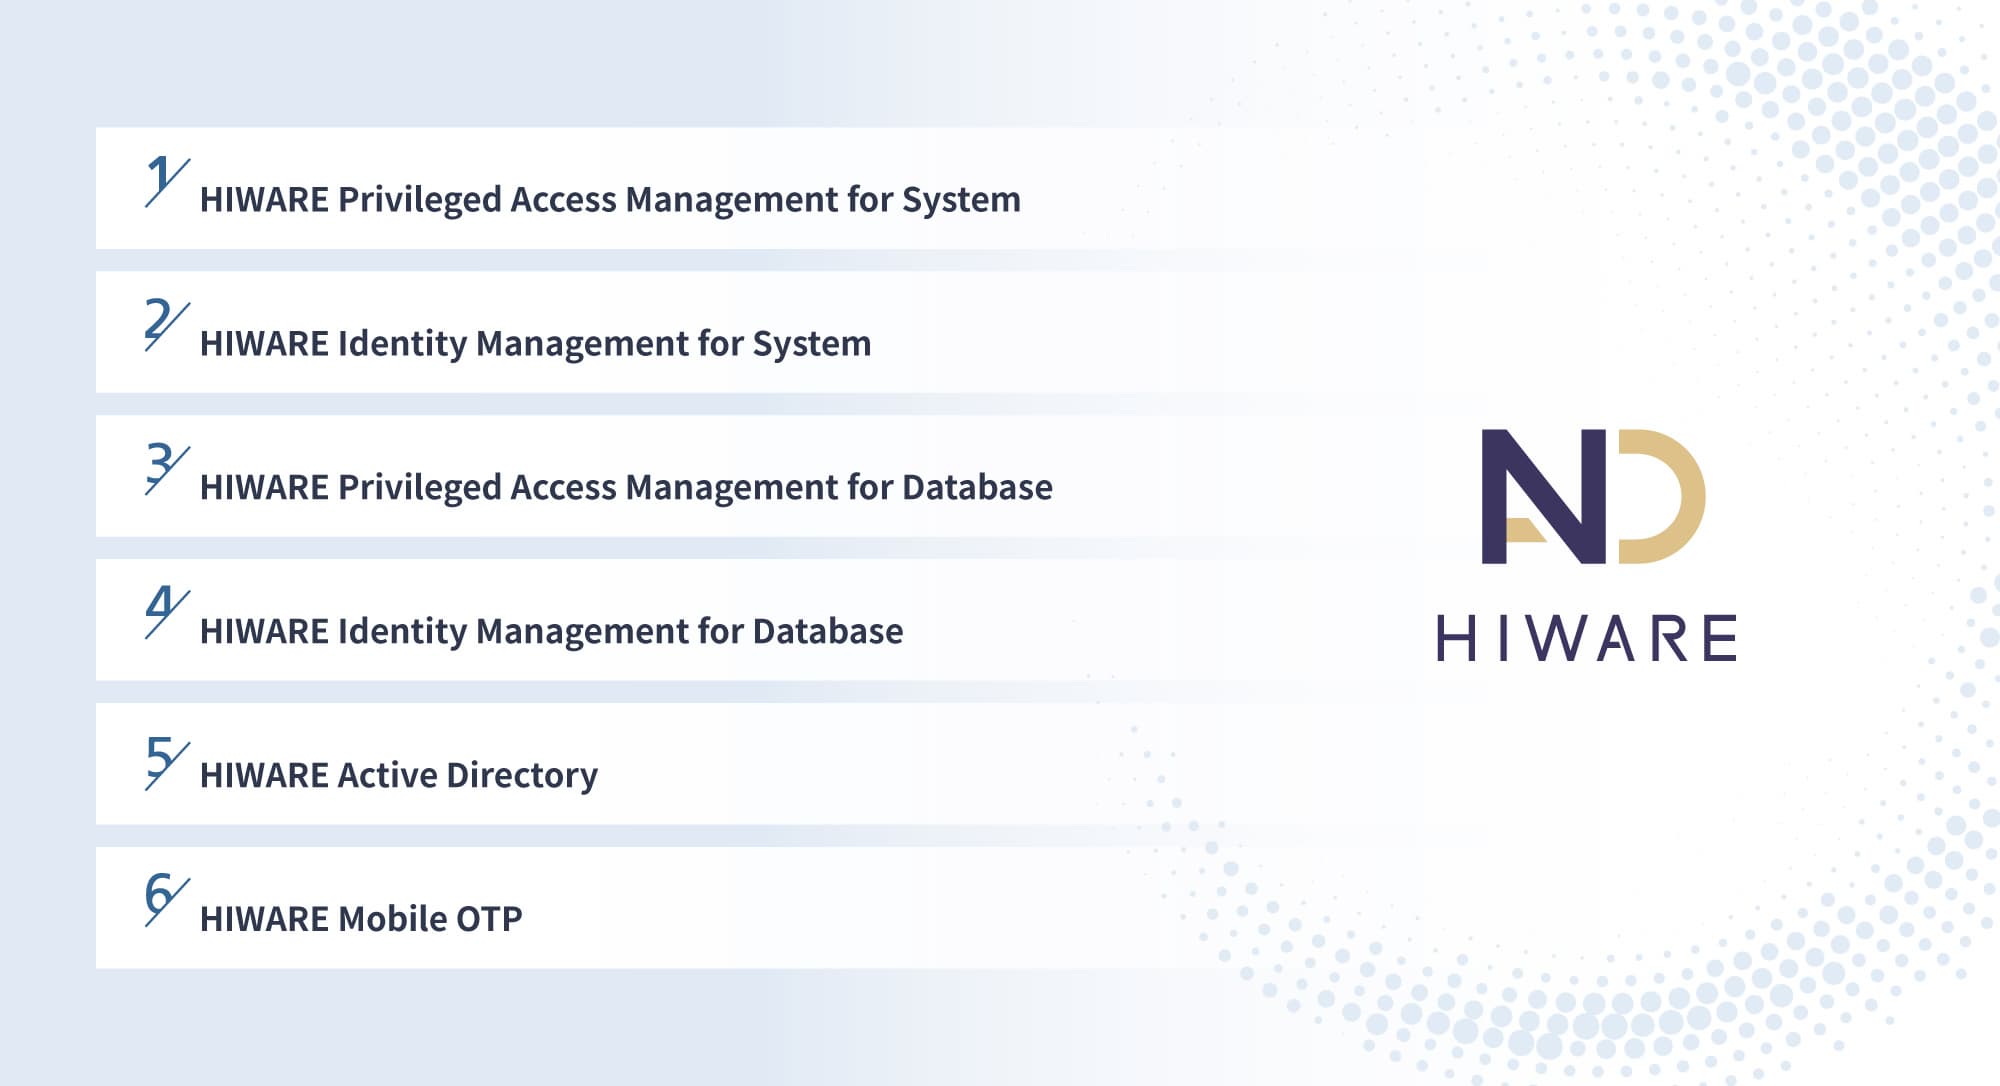 HIWARE Privileged Access Management Solution